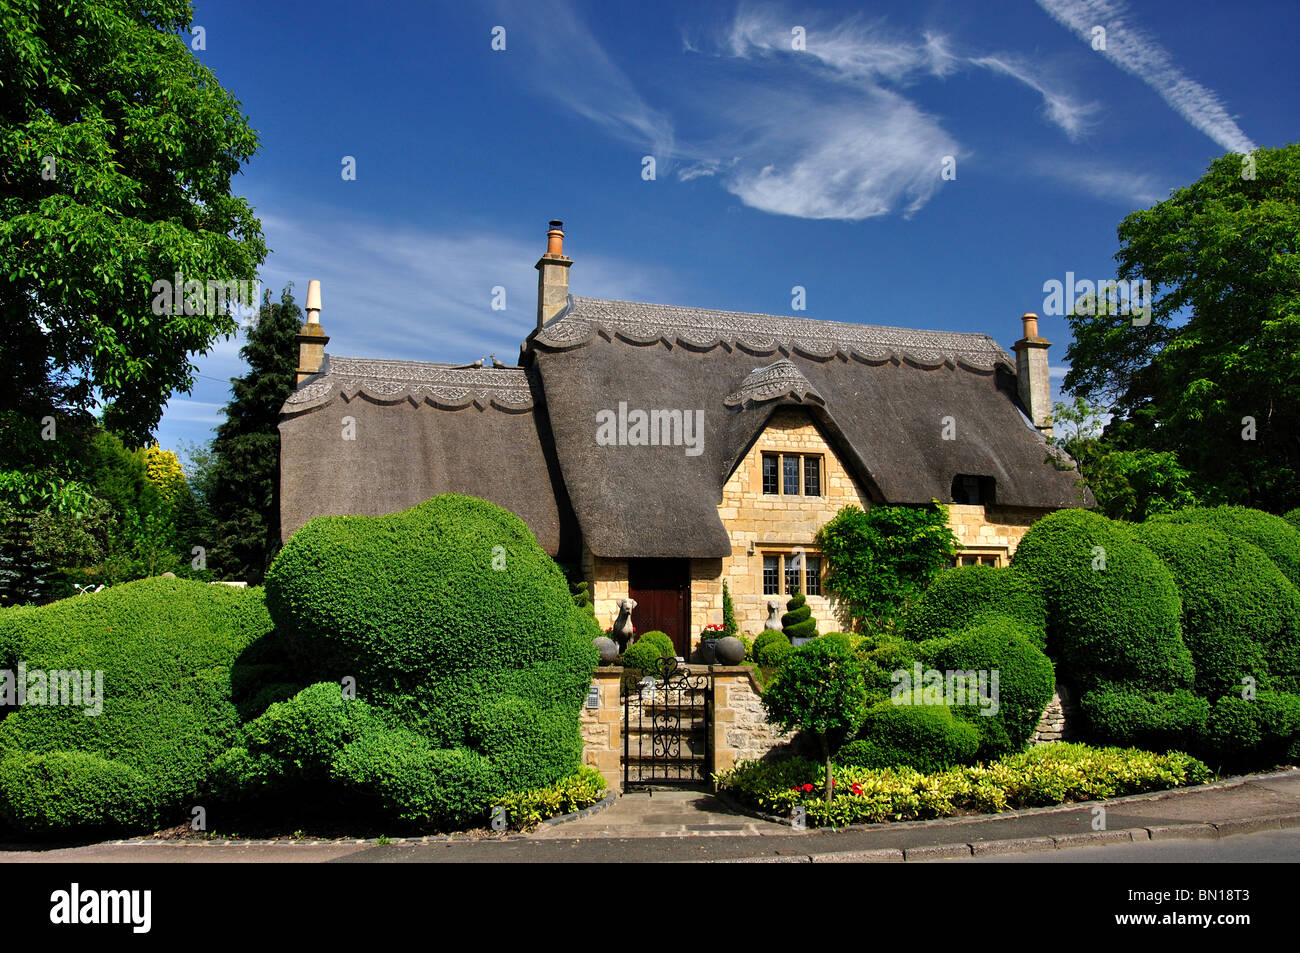 Thatched Cottage Chipping Campden Cotswolds Gloucestershire